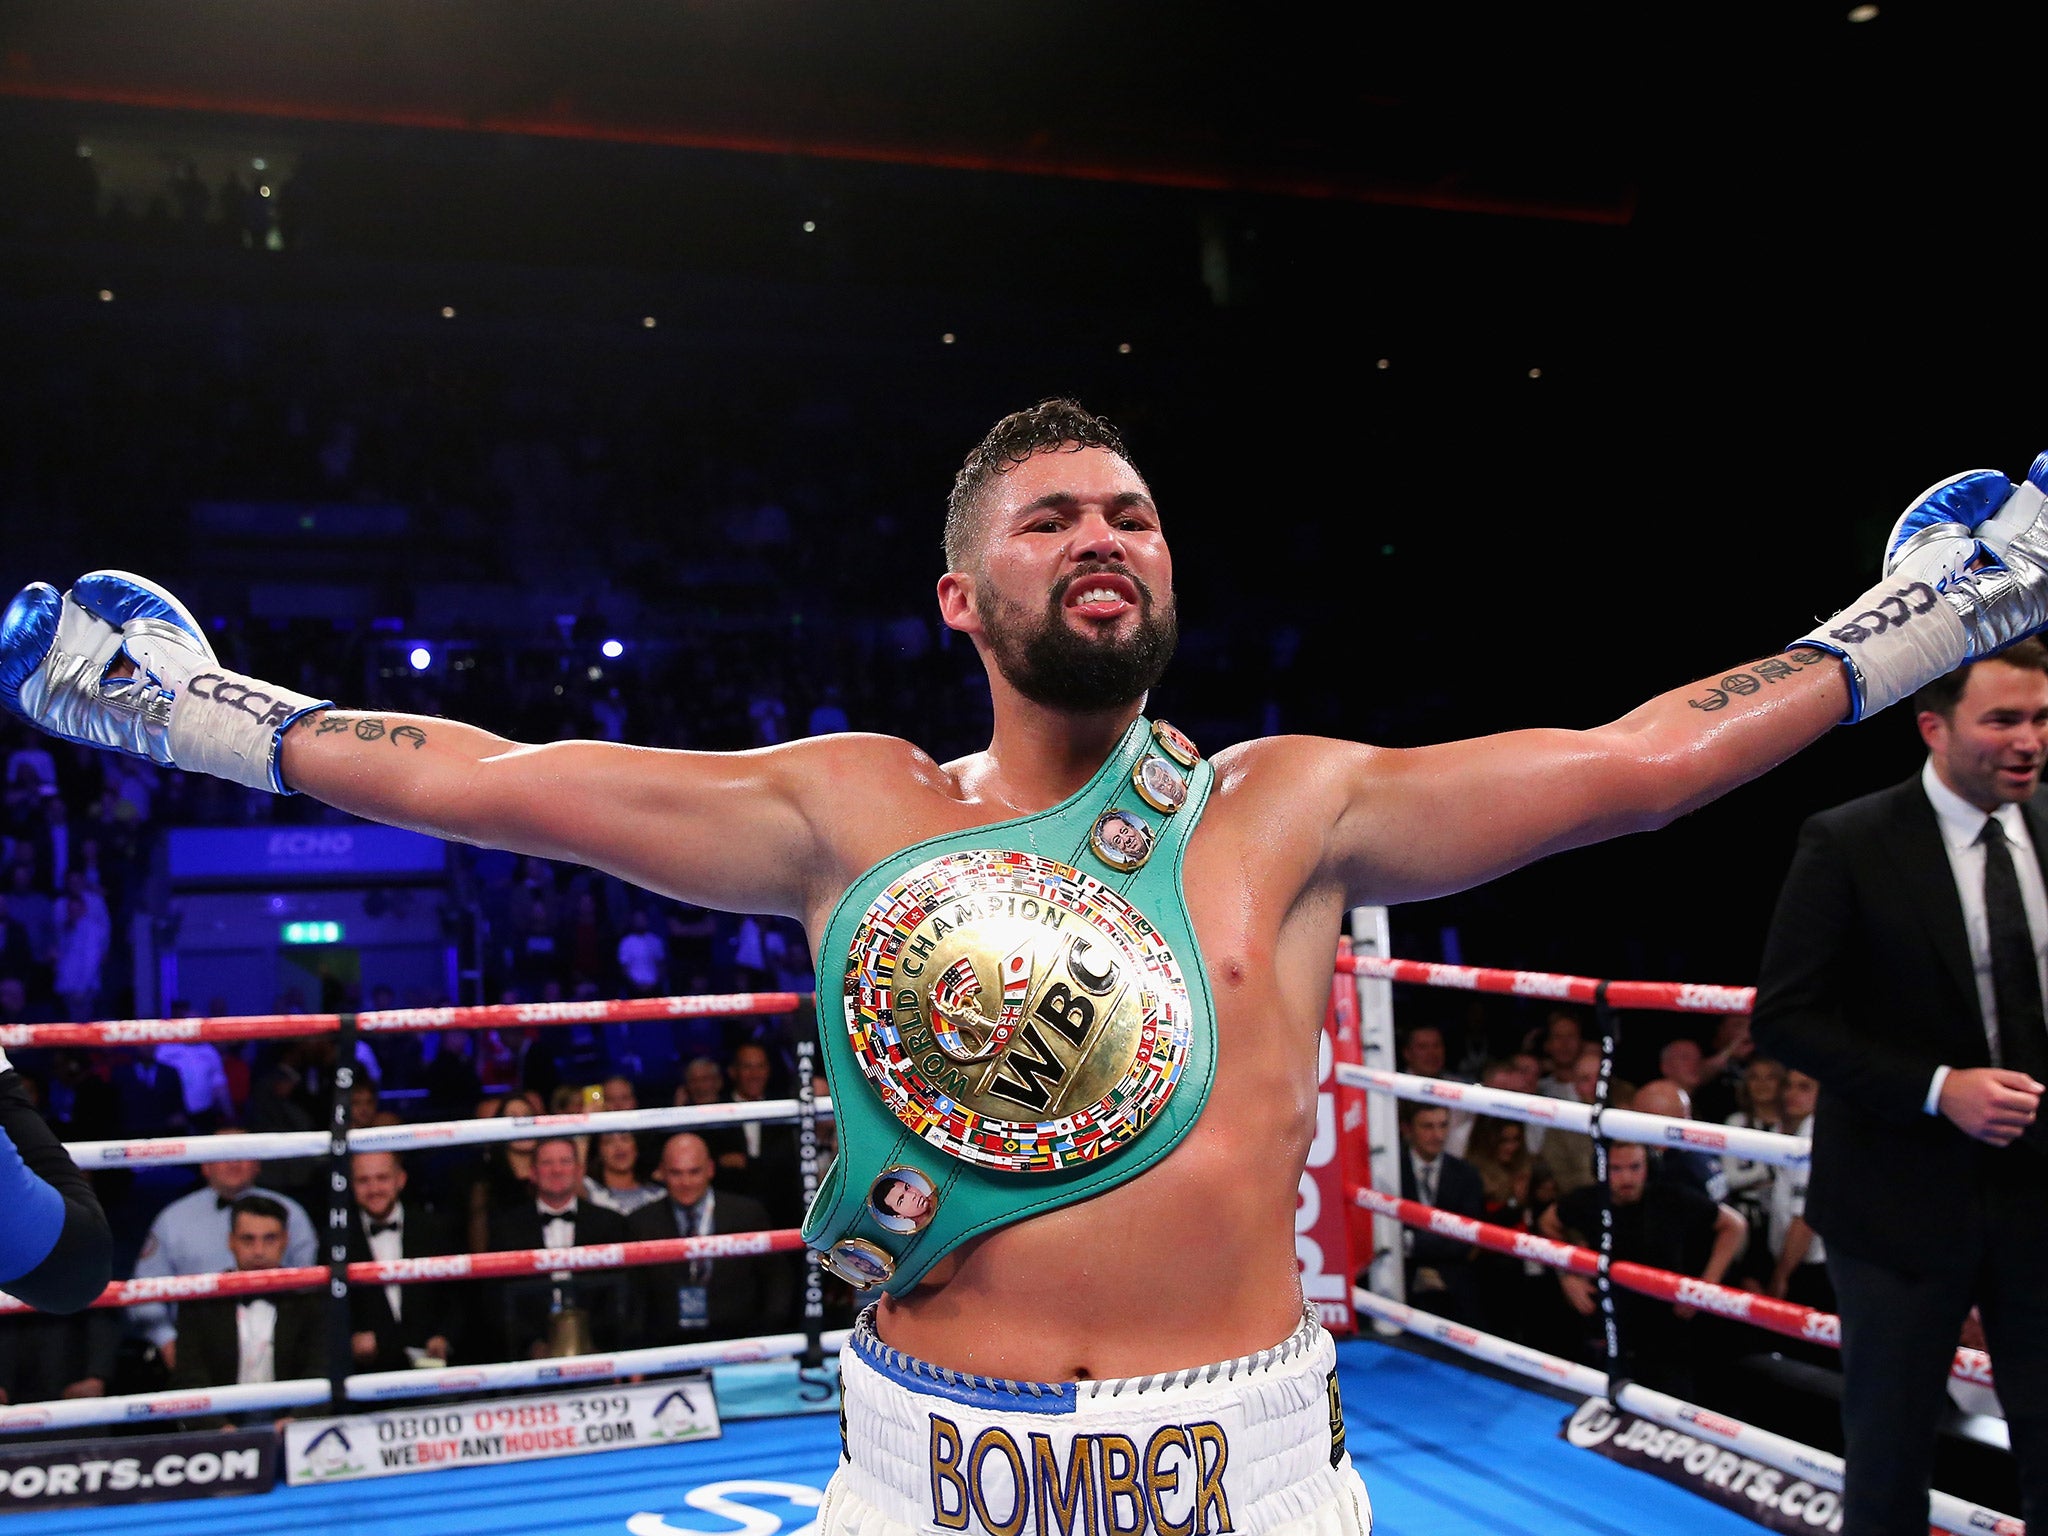 Tony Bellew celebrates his WBC cruiserweight title retention after beating BJ Flores